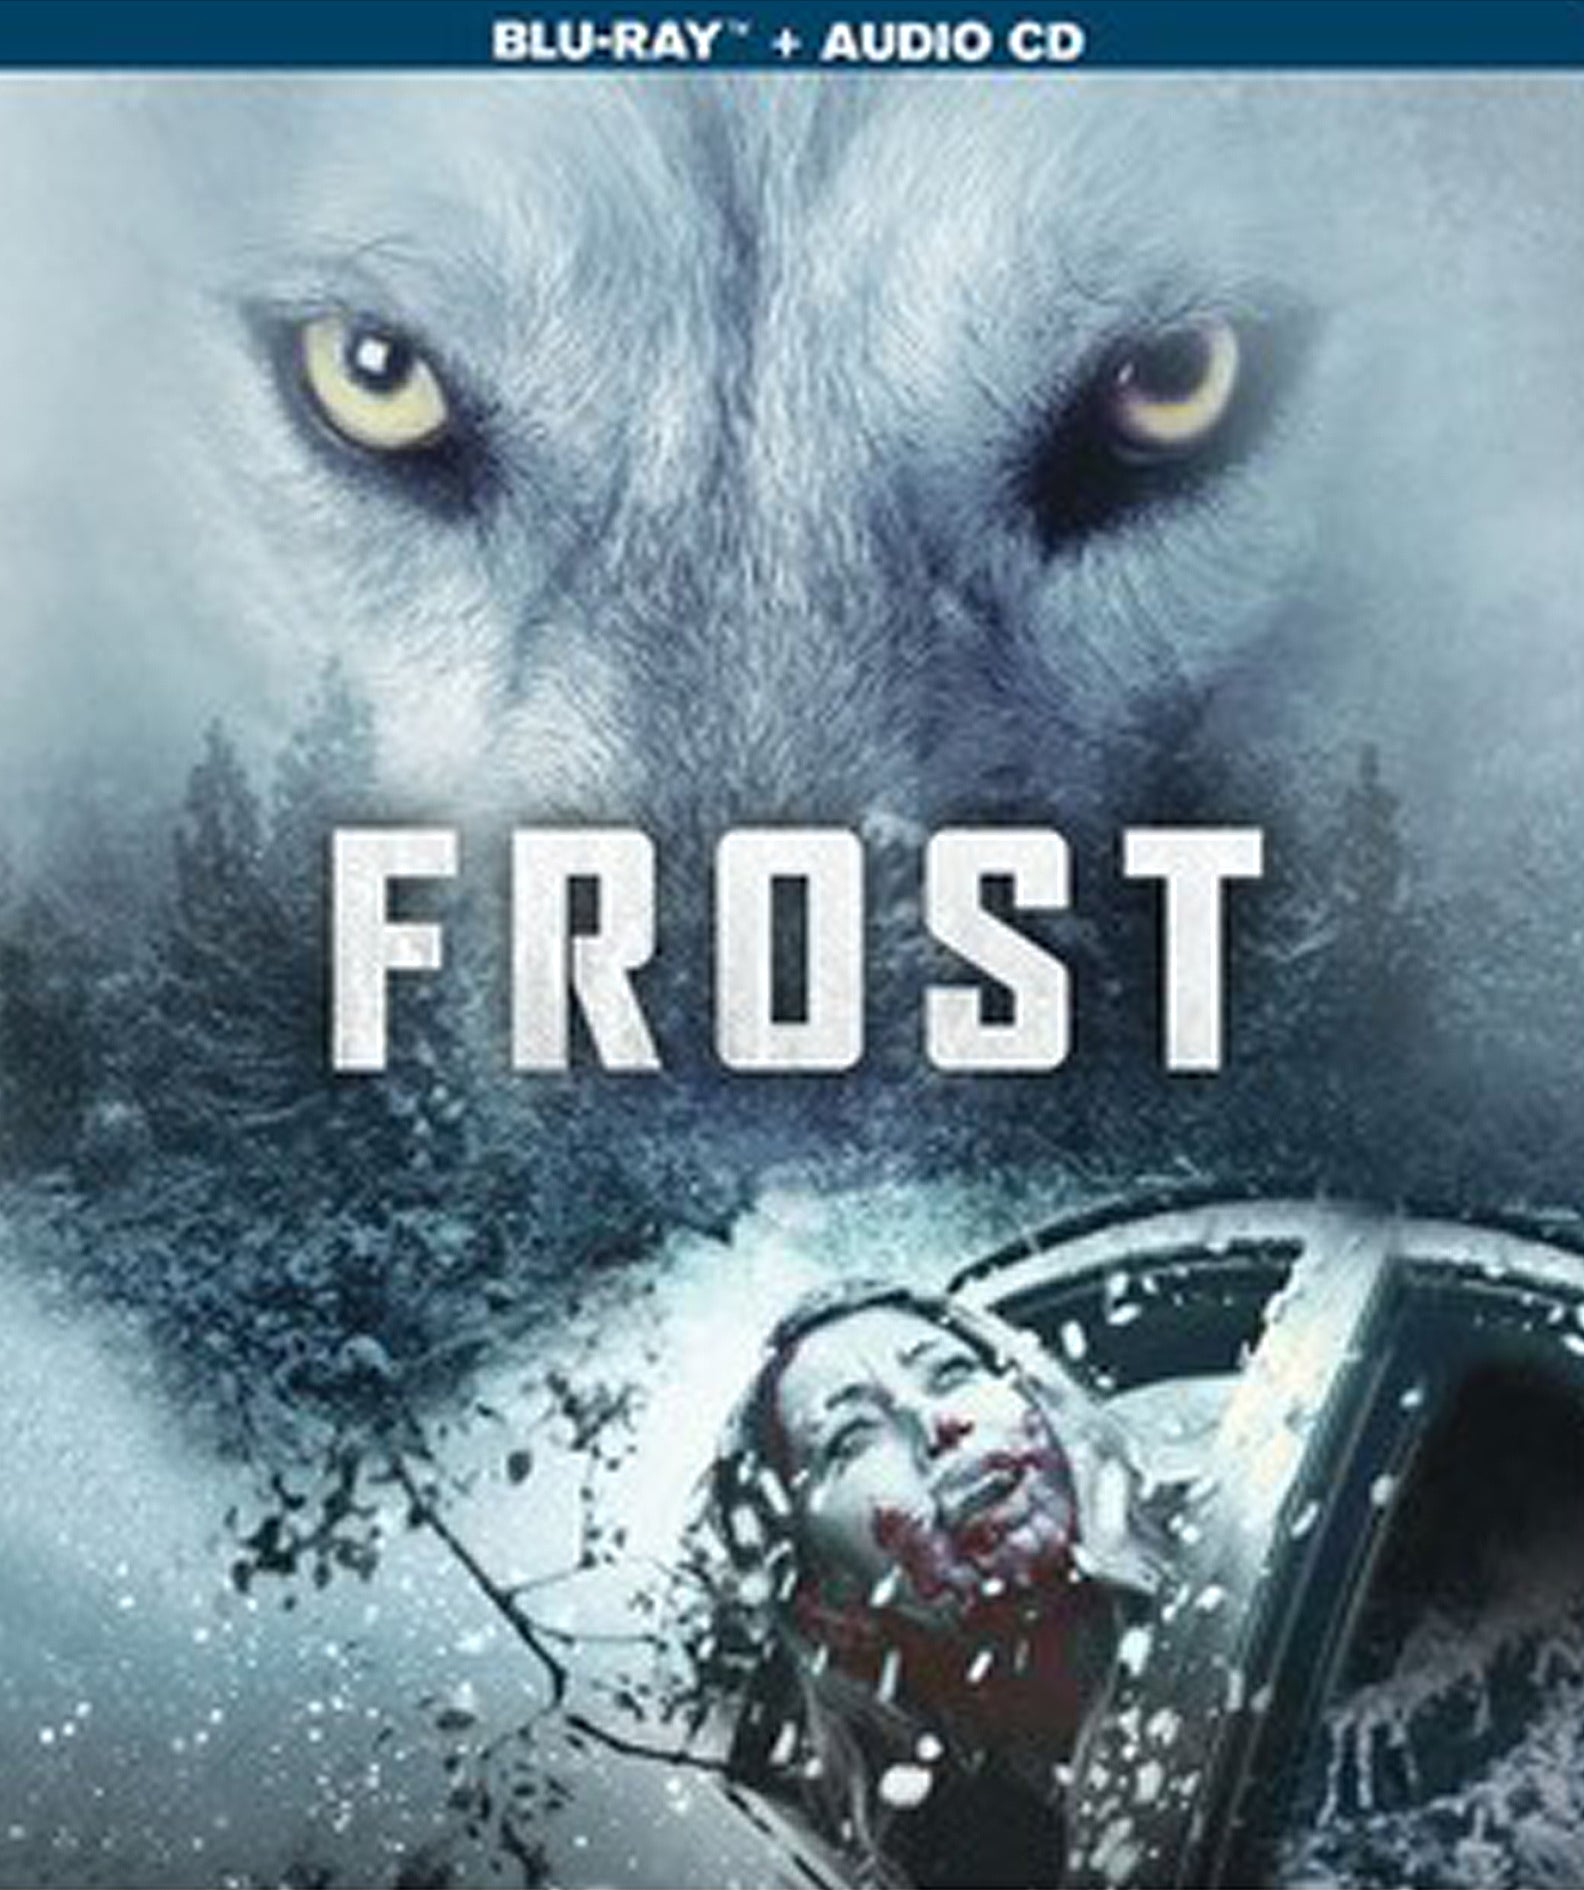 FROST BLU-RAY/CD